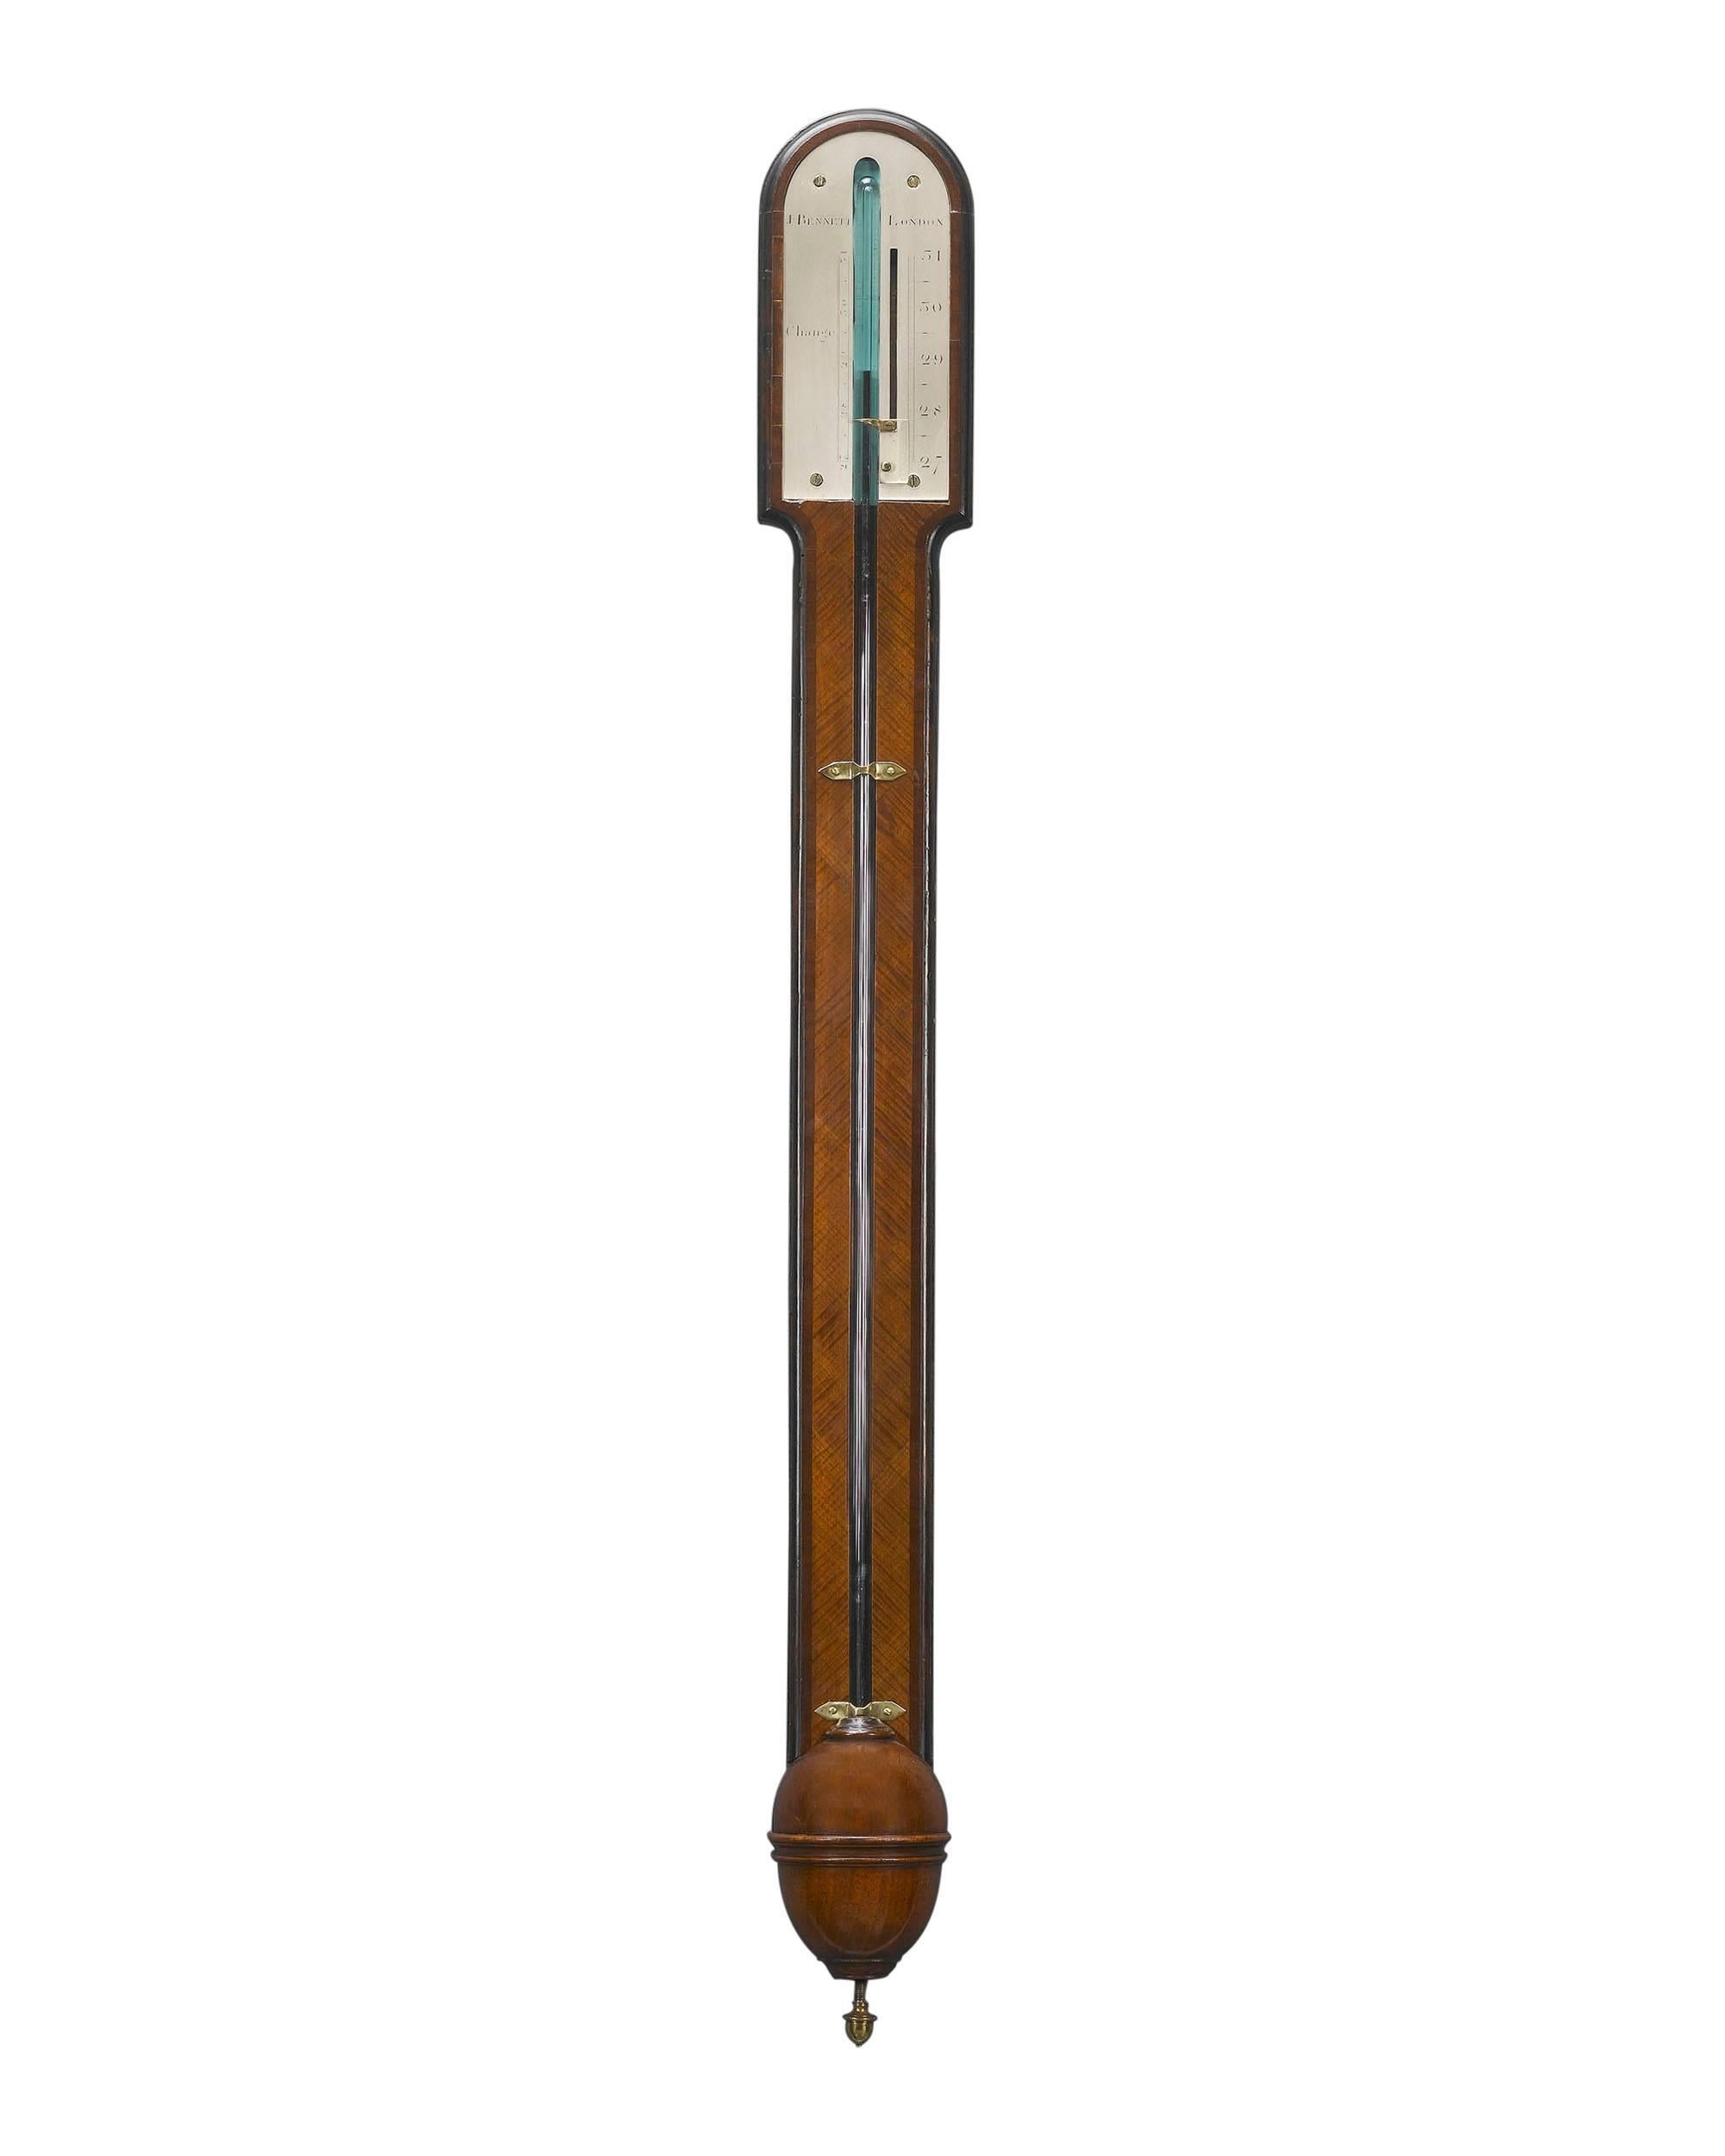 This exceptional Georgian barometer by the leading London instrument-maker John Bennett strongly reflects the prevalent furniture style and architectural elements of the time in its classical simplicity. Not many barometers from before the 1770s